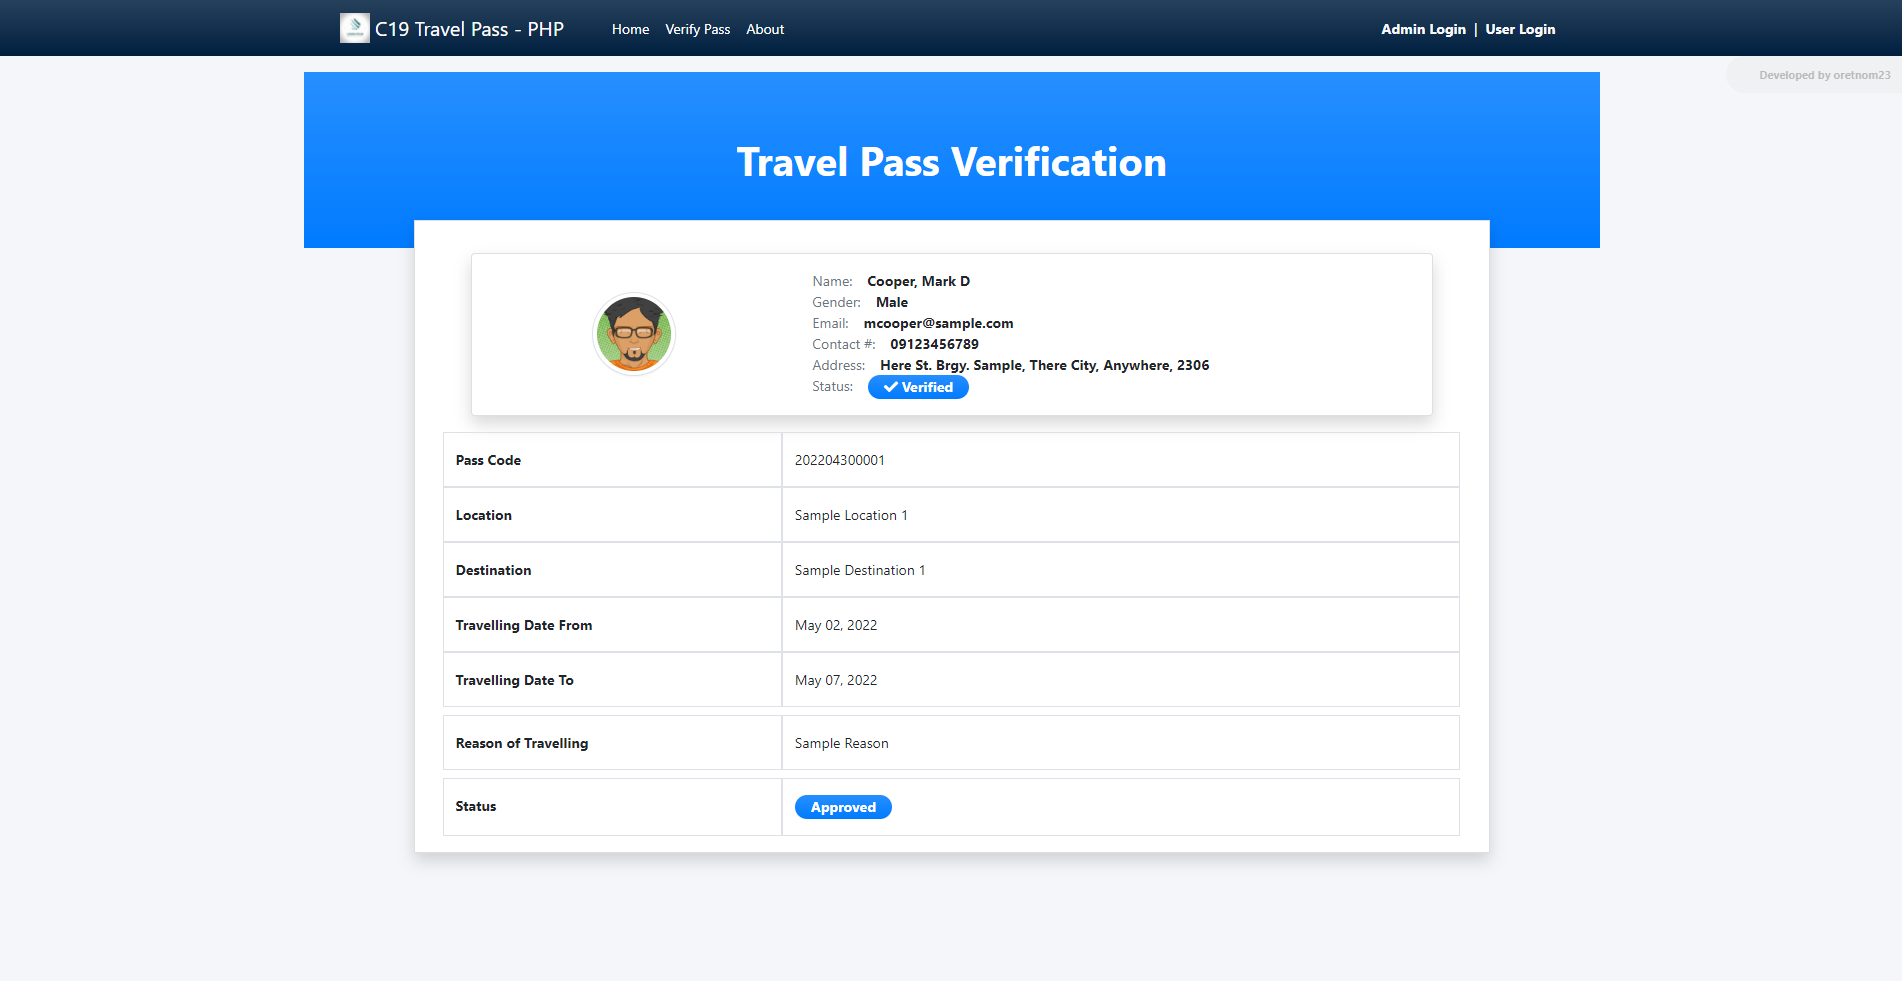 Covid 19 Travel Pass Management System